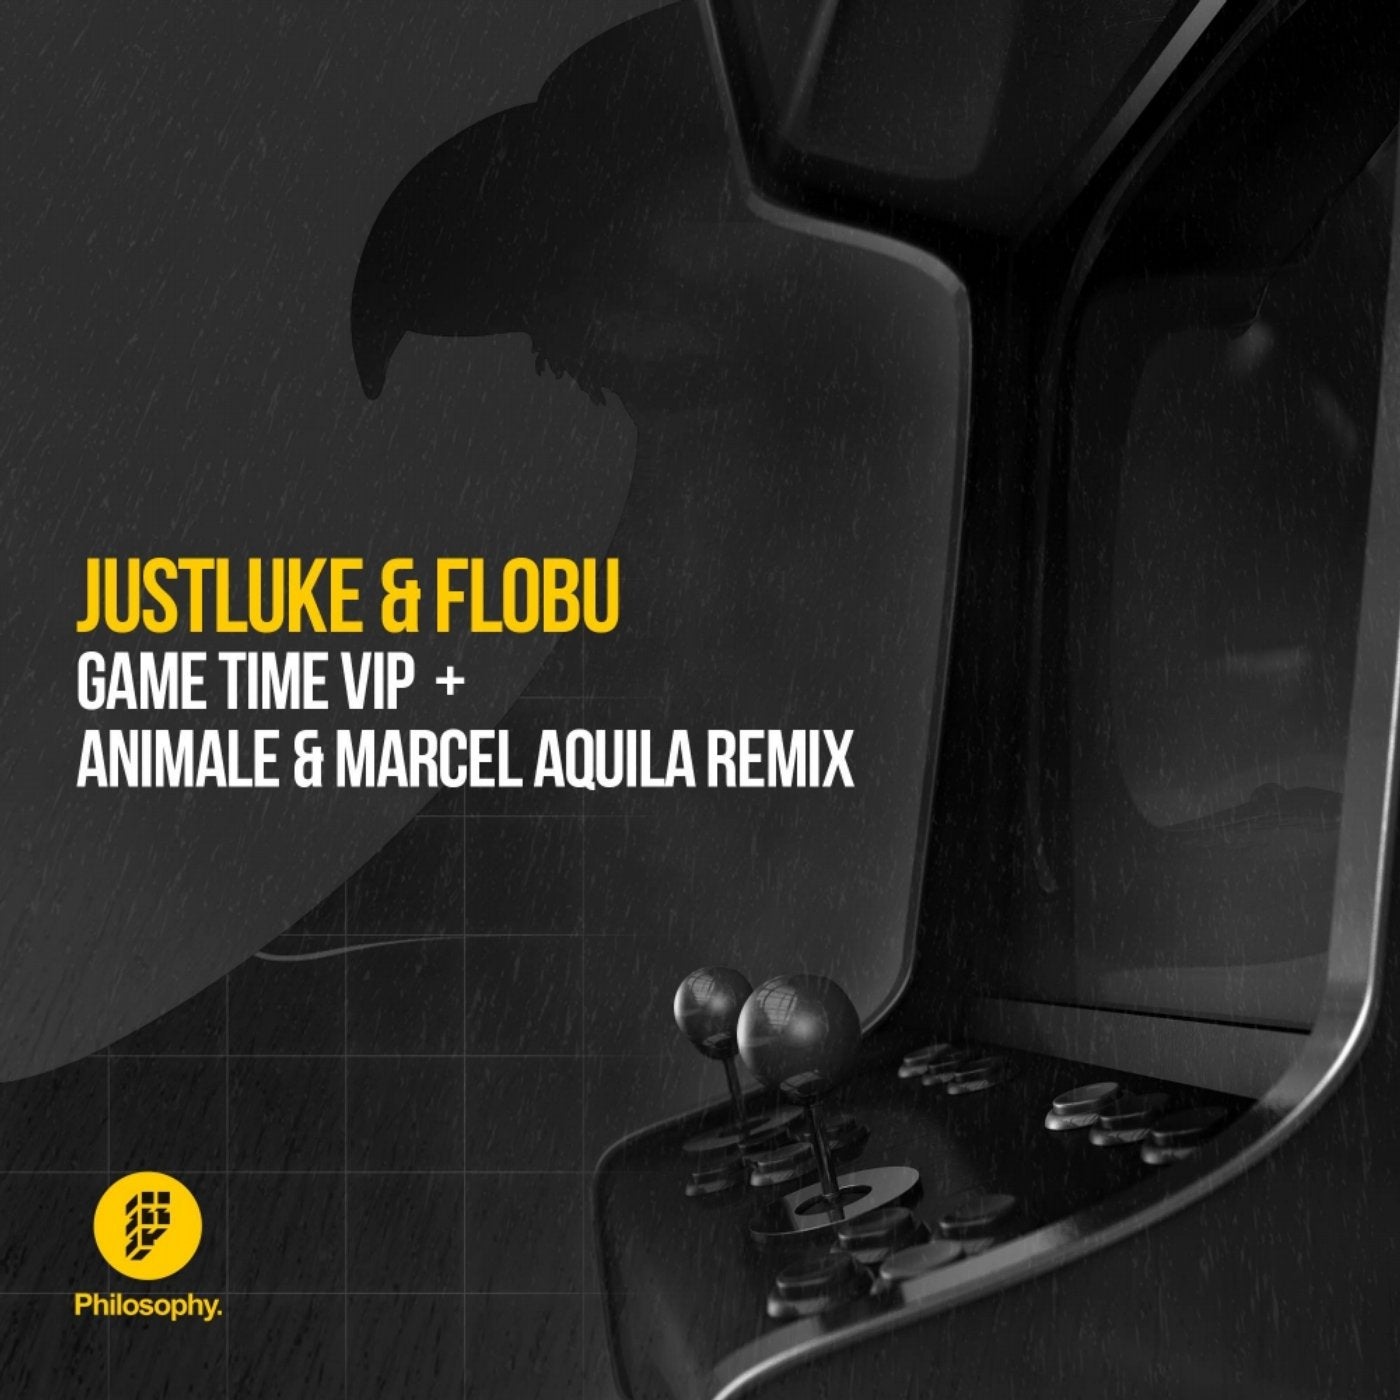 Game Time VIP + Animale & Marcel Aquila Remix